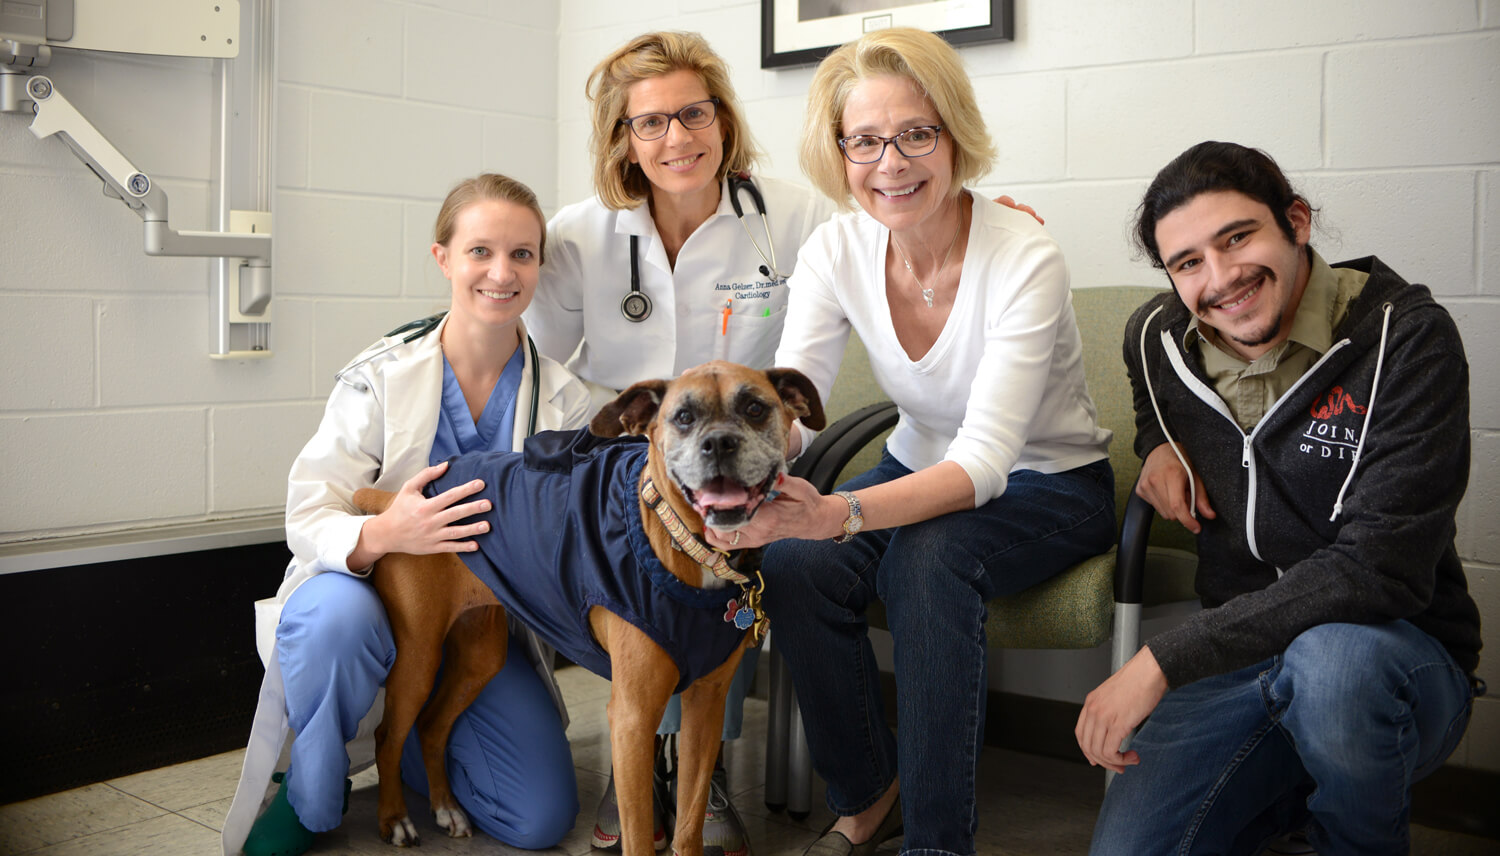 Penn Vet cardiology resident Dr. Alexandra Crooks (left) and cardiologist Dr. Anna Gelzer (second to left) led the care for Sophie, the beloved pet of Karen Cortellino, pictured with her son Alex Peña.